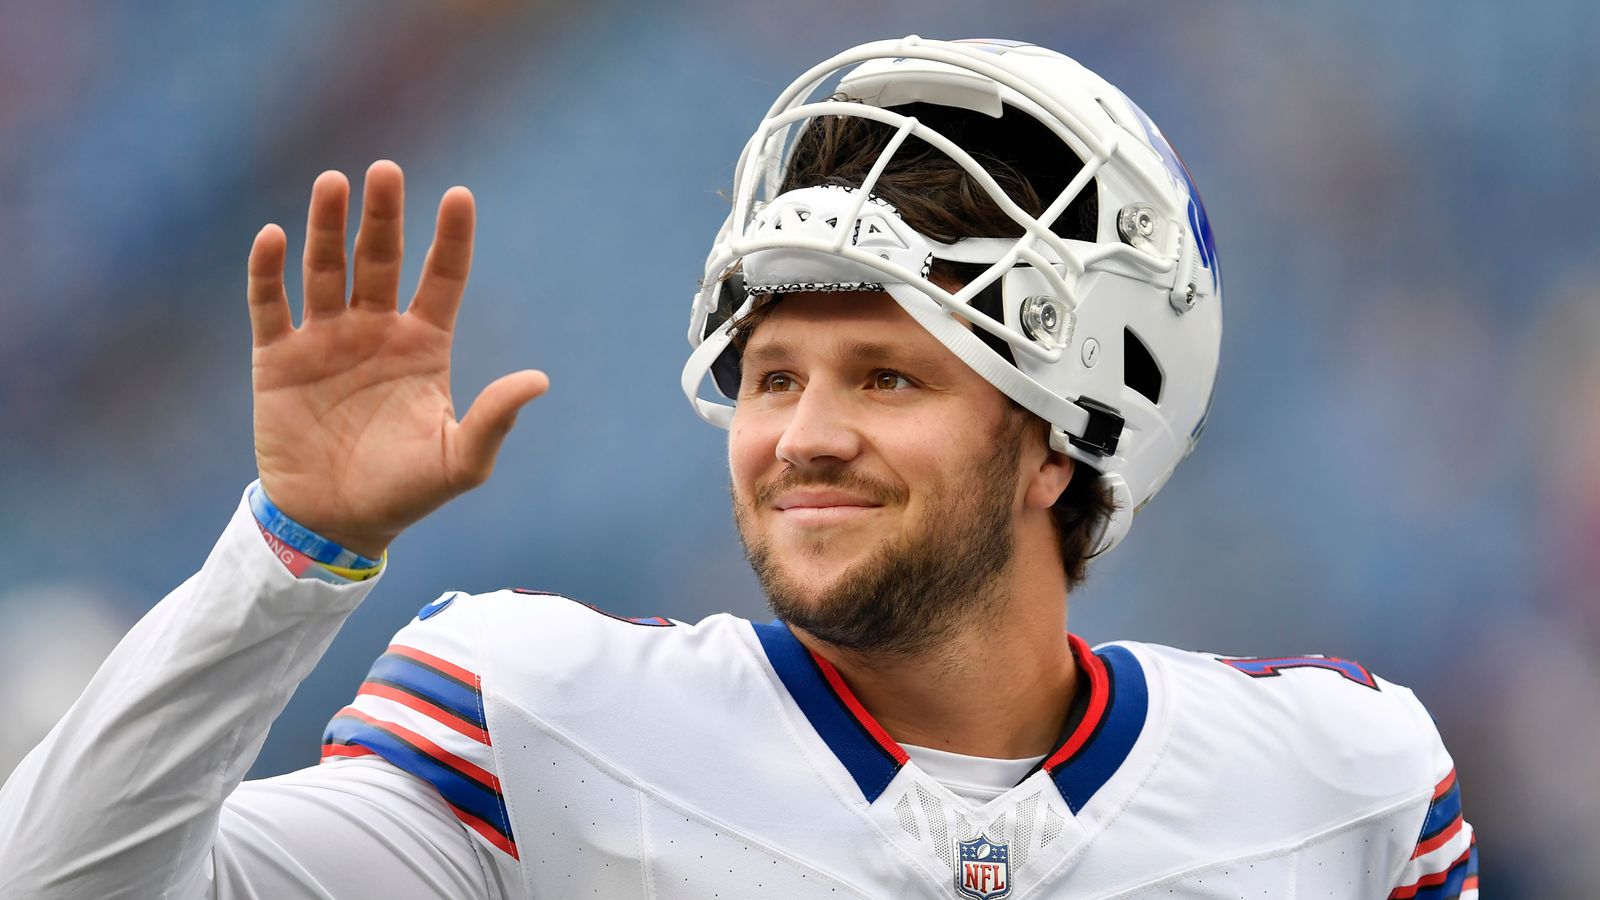 Phoebe Schecter: Buffalo Bills will relish ‘underdog’ tag as Josh Allen enters huge season in search of Super Bowl ring | NFL News